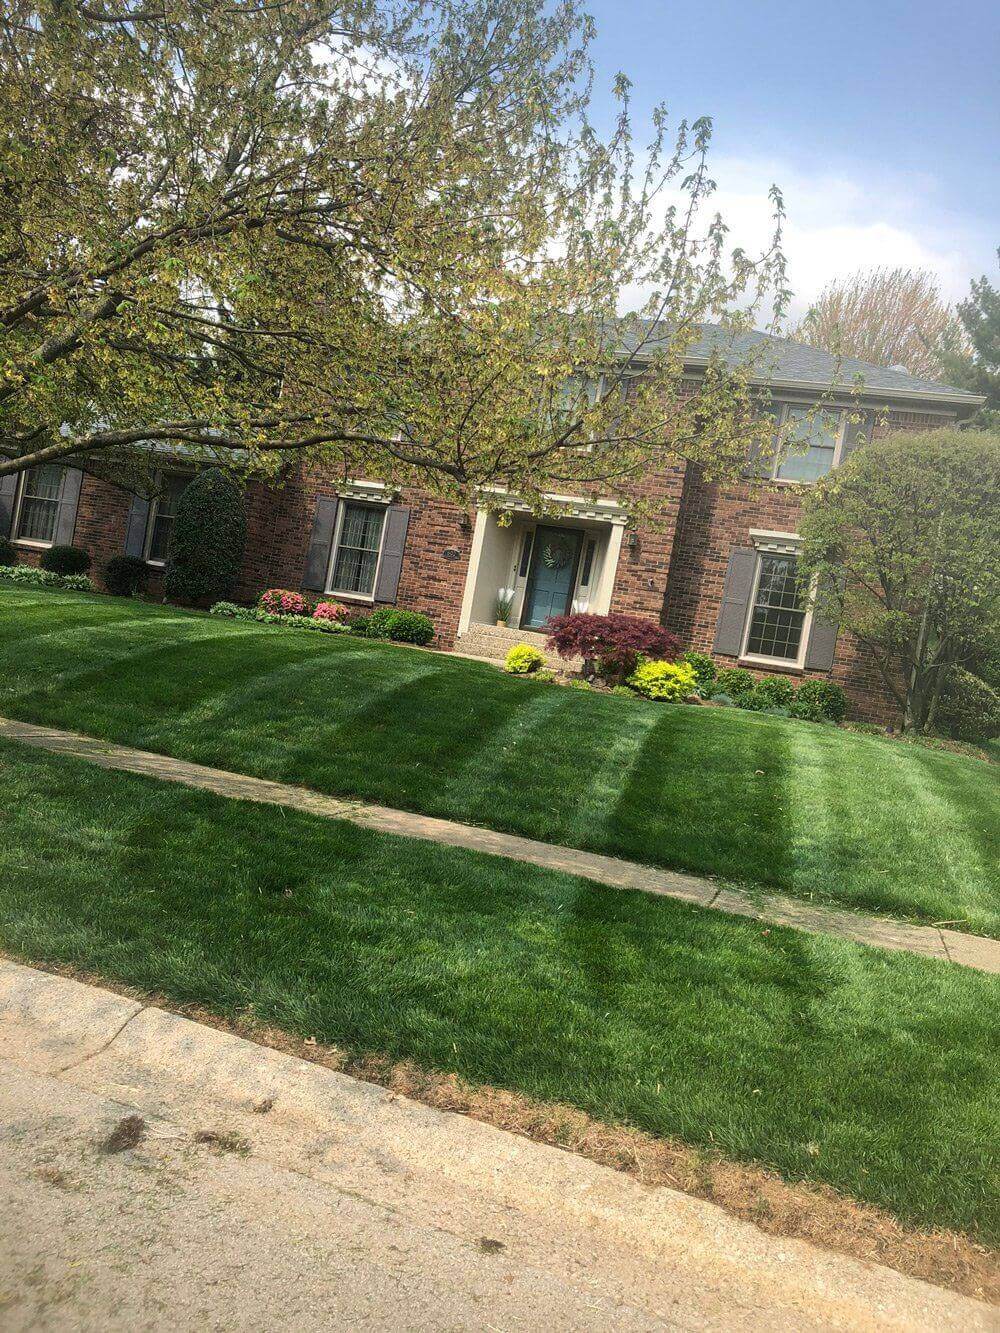 MowBetter-Lawnscapes-Louisville-Gallery-72